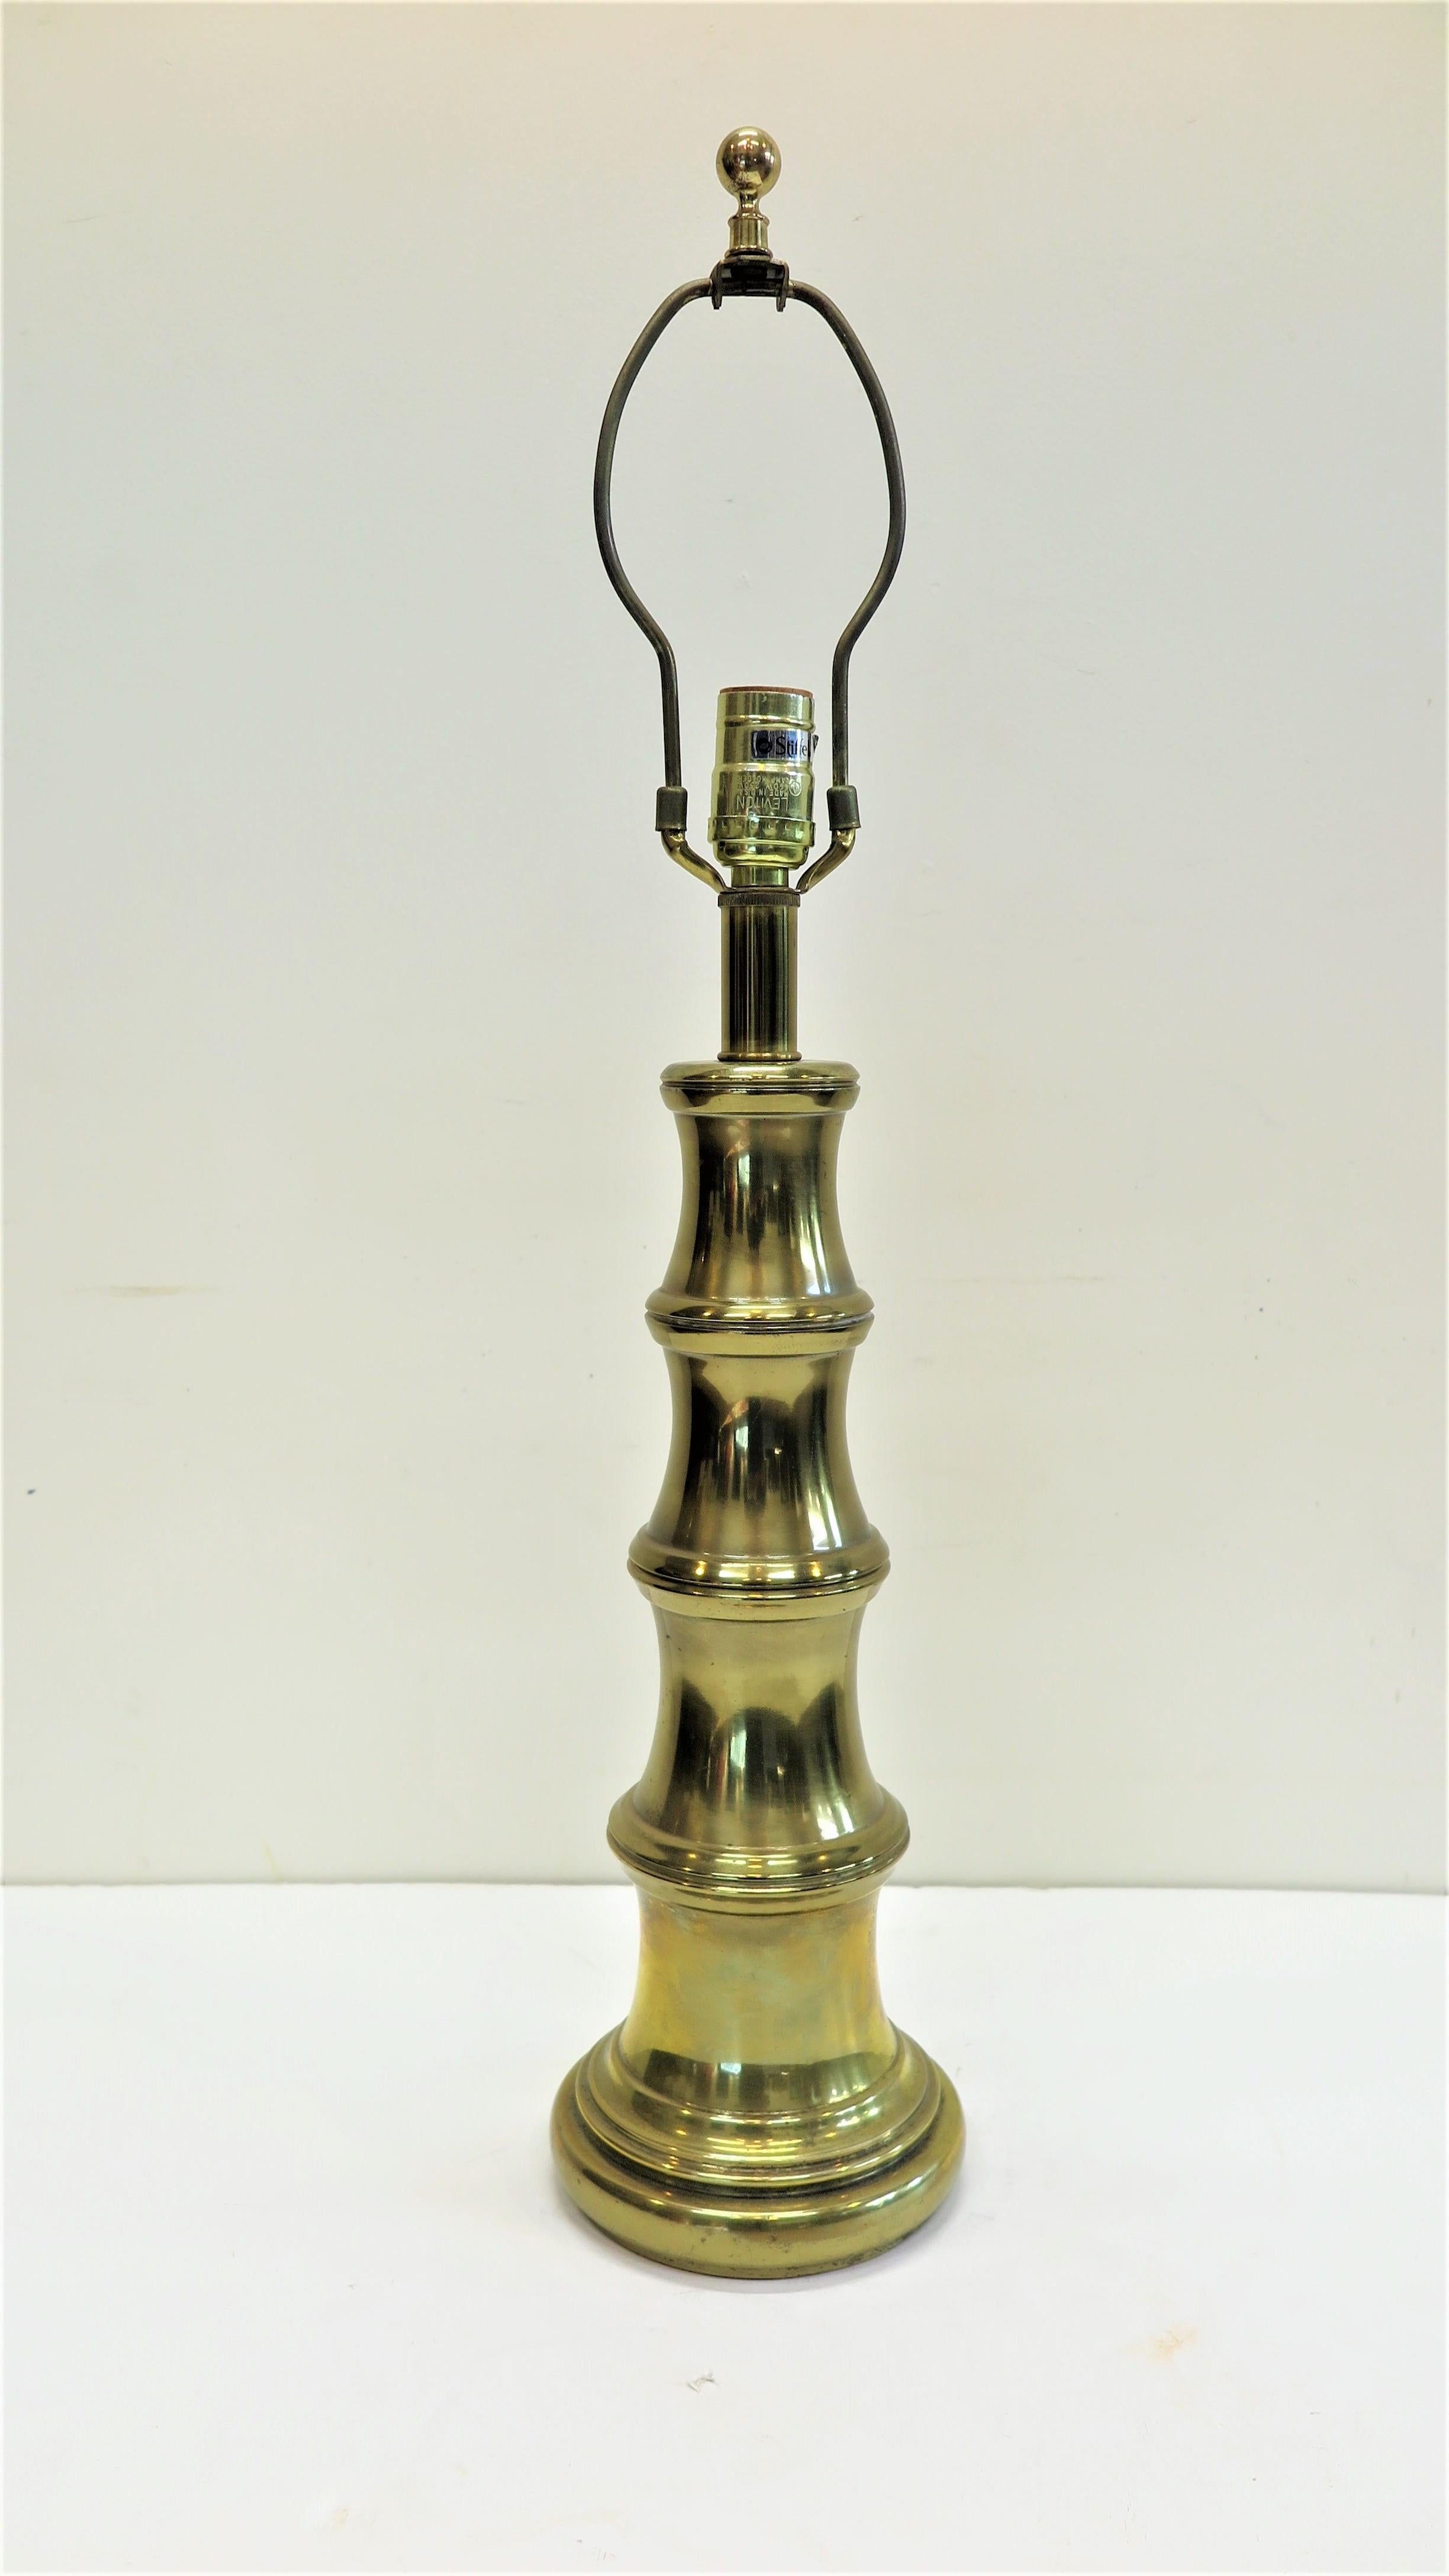 Stiffel brass bamboo style table lamp. Stiffel brass table lamp having a shape simulating Bamboo. Very good condition. Having a three way switch. Quality made solid brass table lamp American 1950-60. 
Picture of lamp with shade is only for